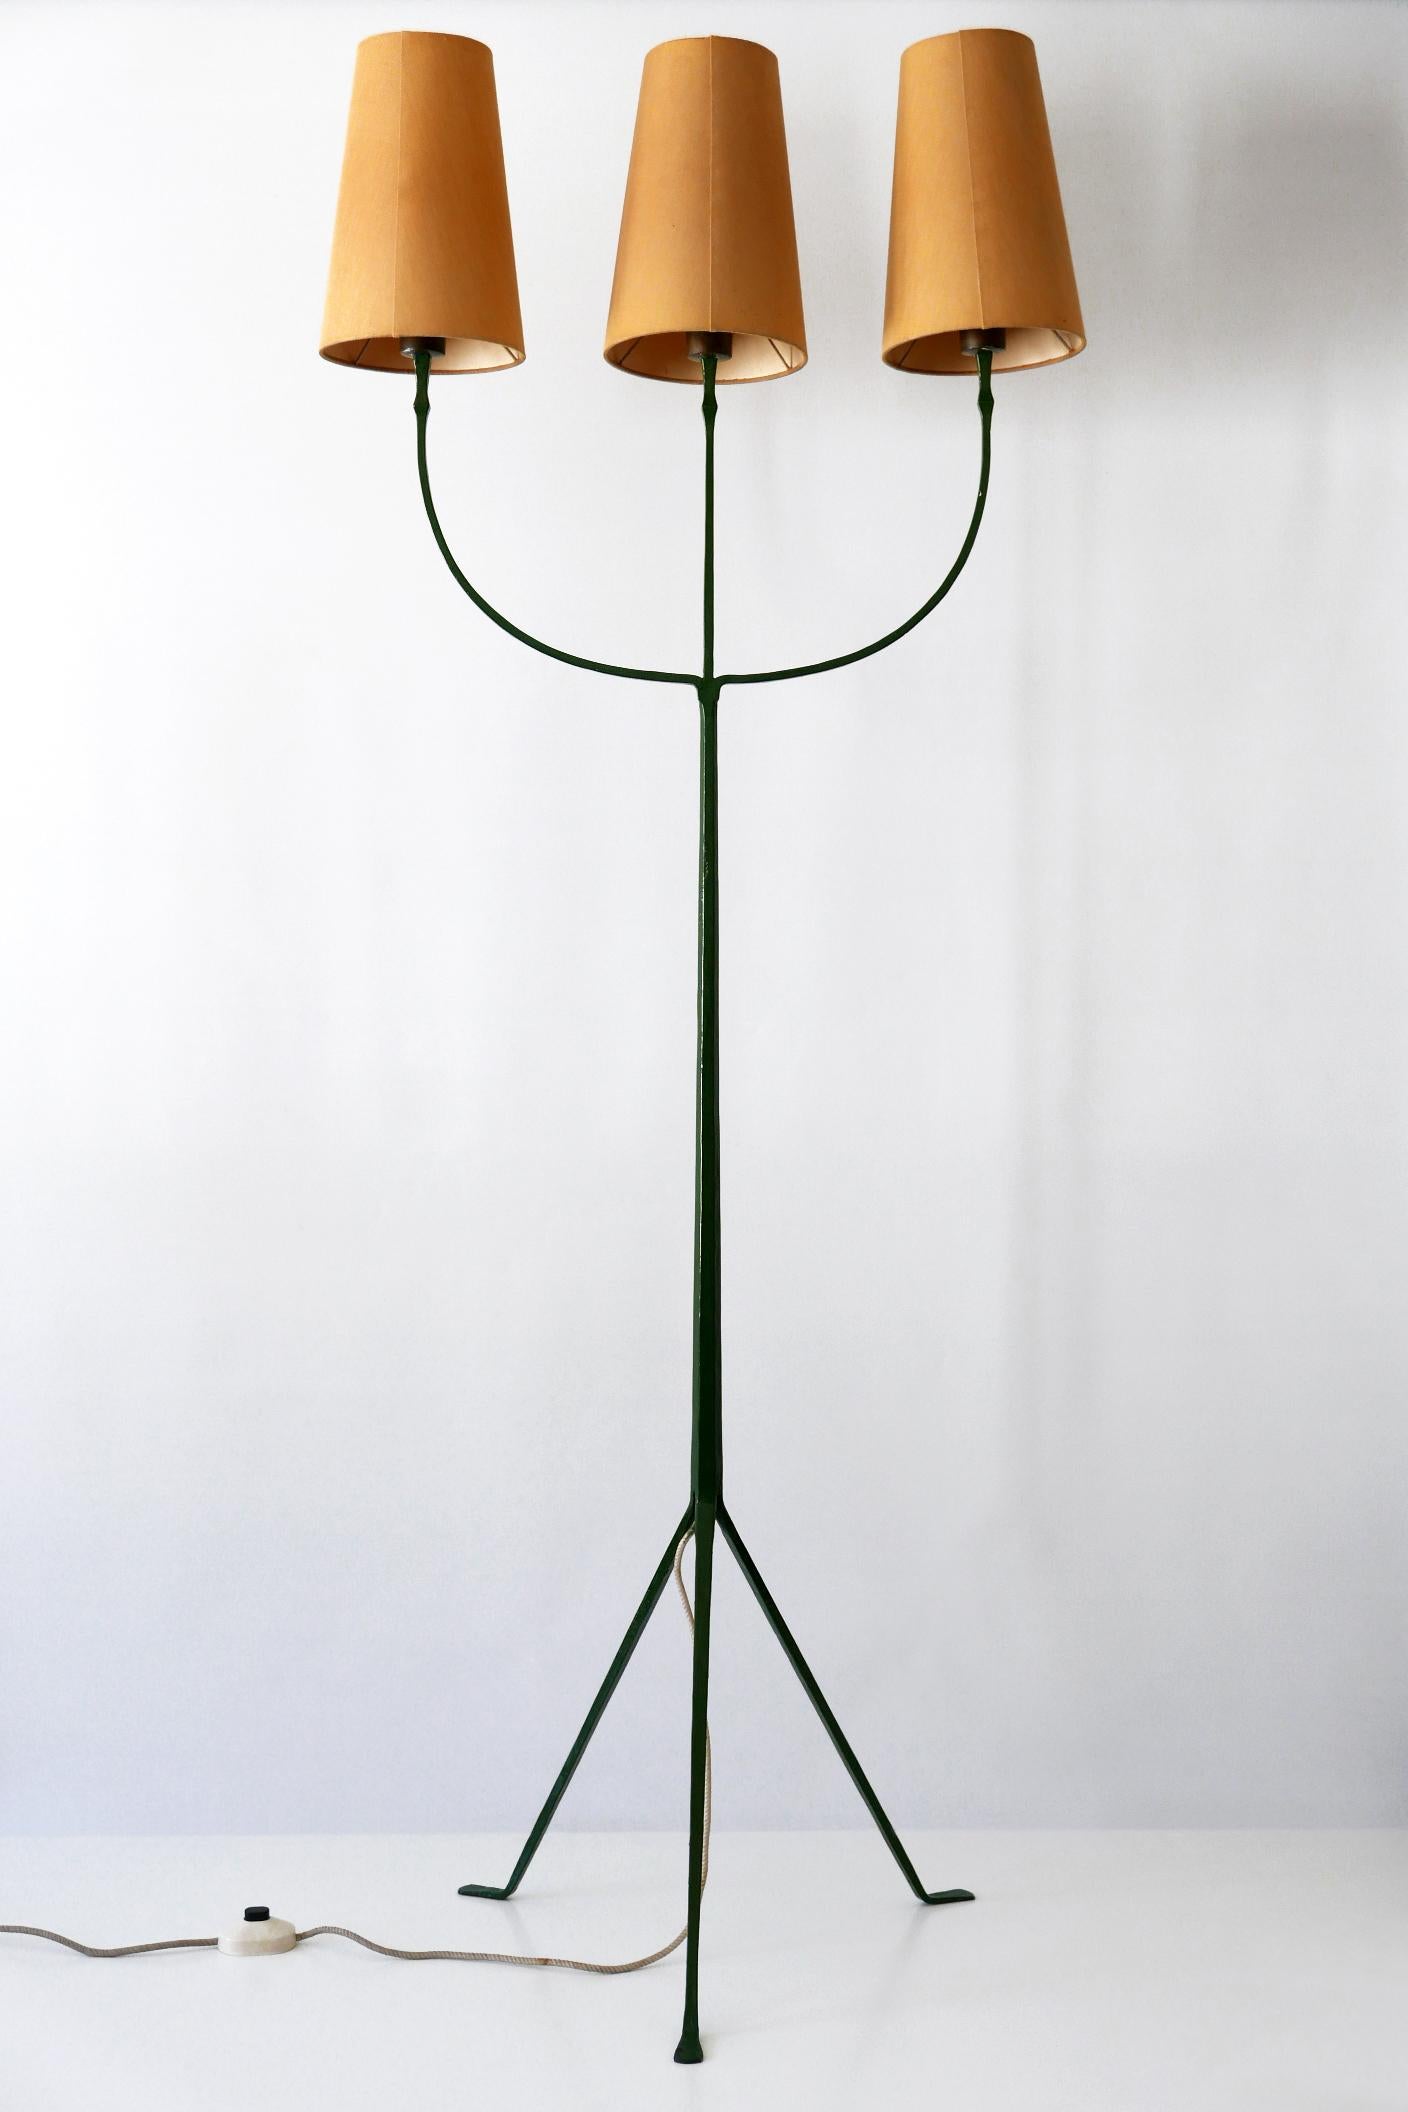 Exceptional Mid-Century Modern Three Flamed Floor Lamp, 1950s For Sale 2